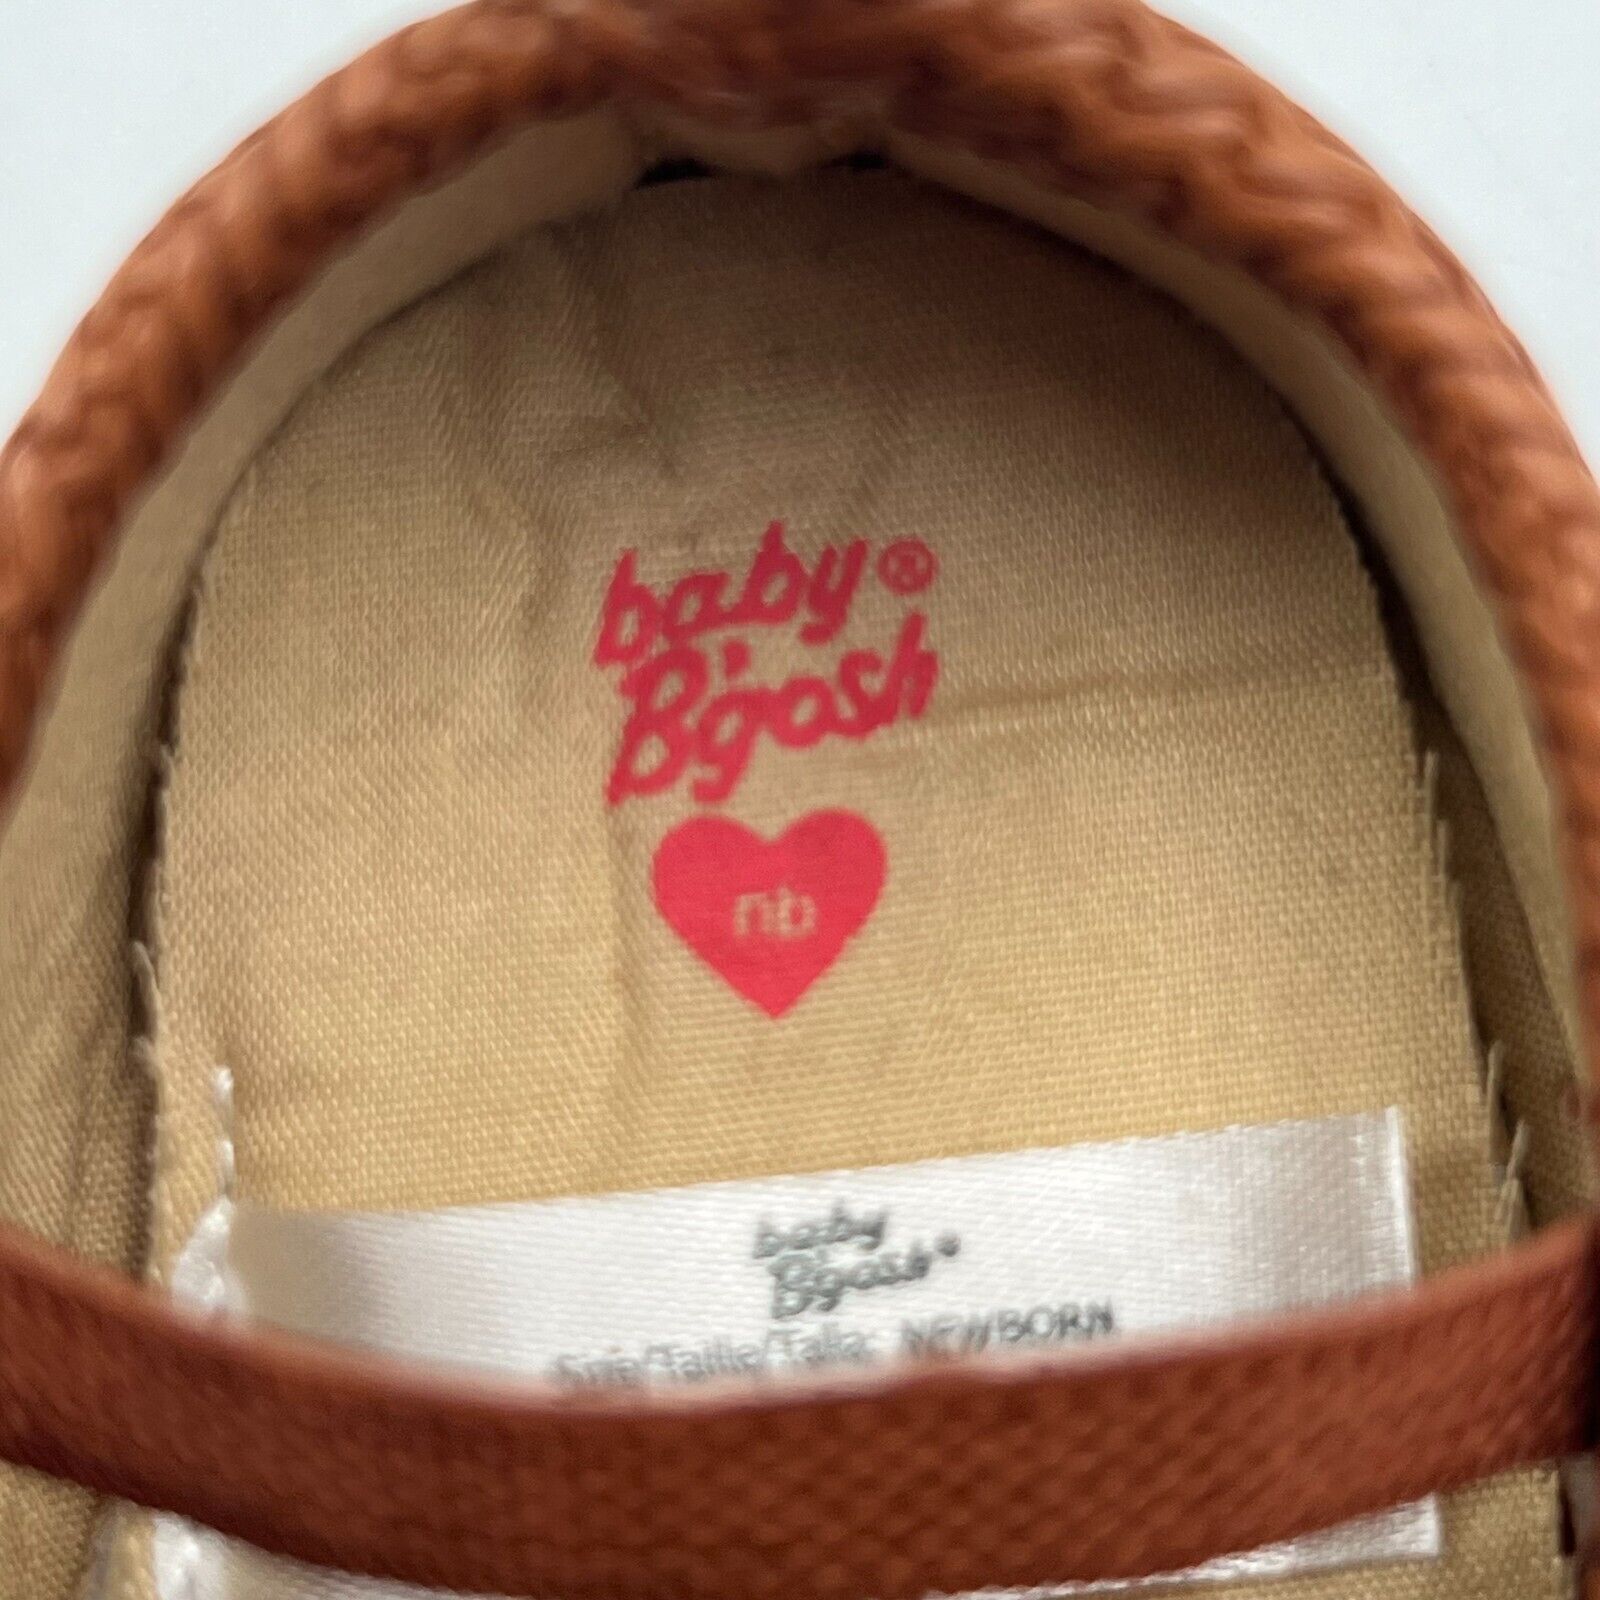 Baby B'gosh Mary Jane Tan Brown Weave Slip On Shoes Comfy Size New Born NB